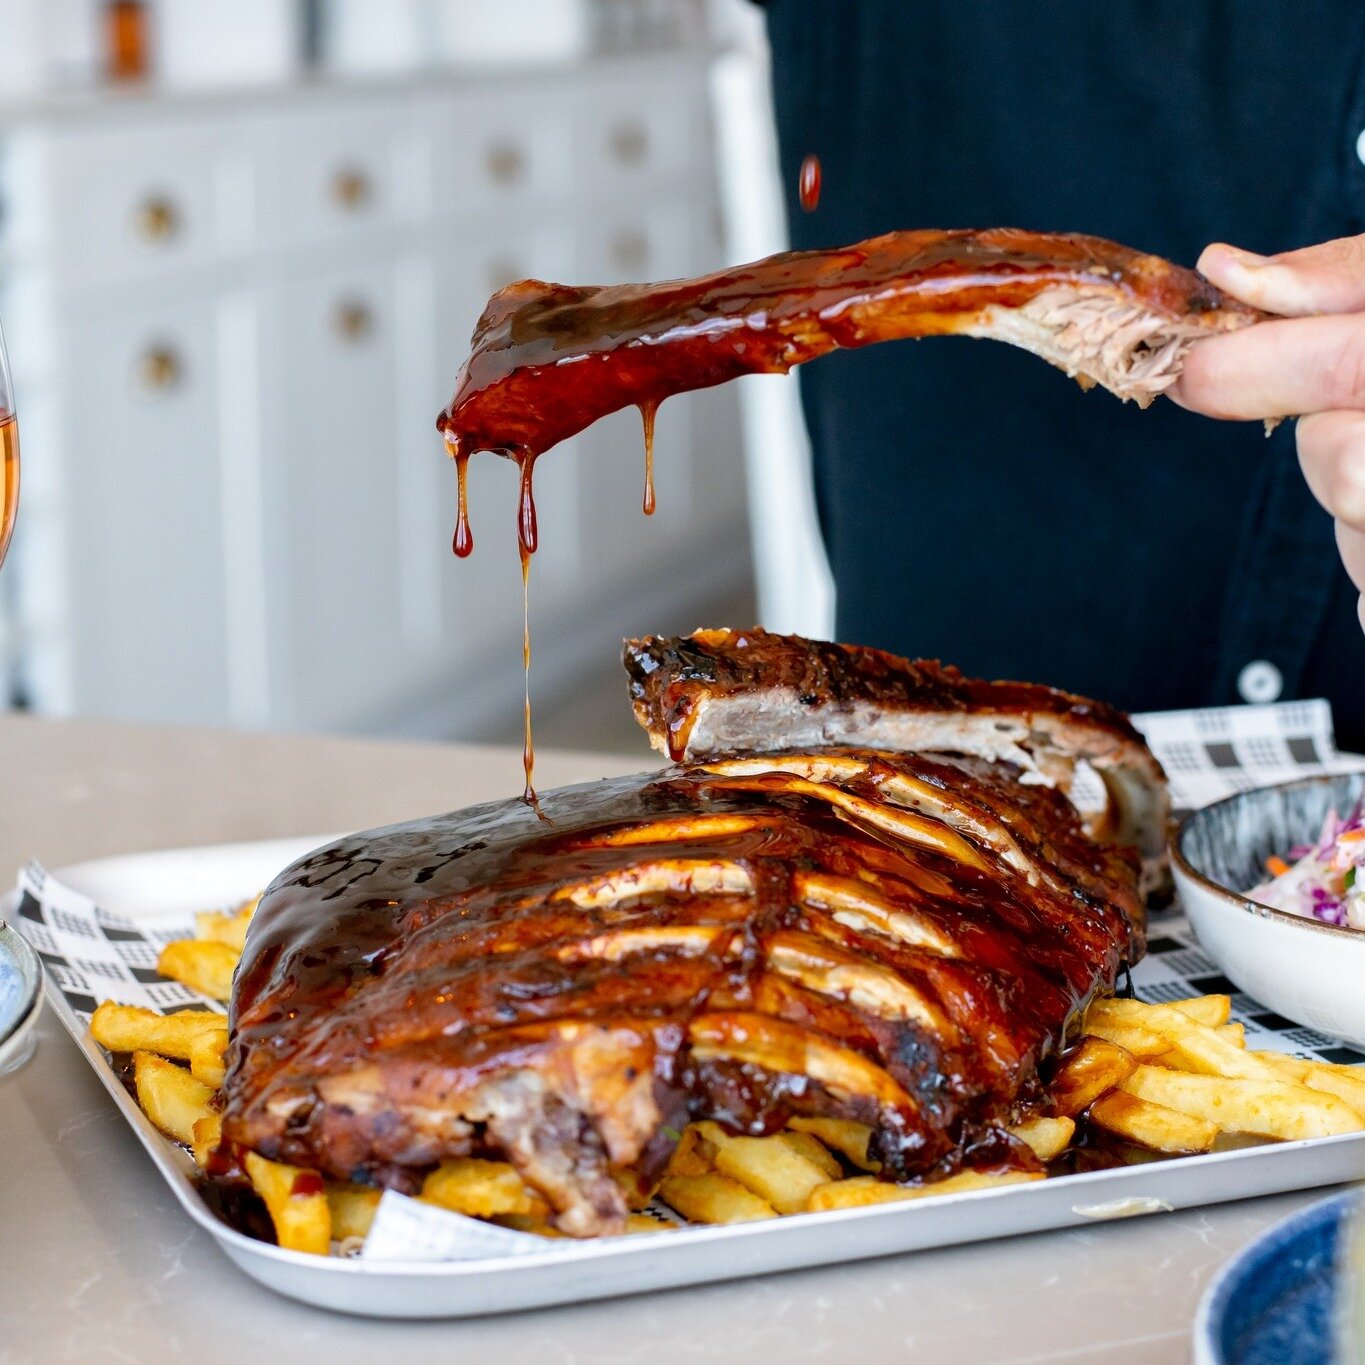 Have you tried our American Full Plate Pork Ribs? Get it in half or full, perfect to share 🐷

Delicious slow cooked BBQ pork ribs served with crispy fries and creamy apple slaw 🤤

Book your table now and view the menu online now! 
https://cronullar